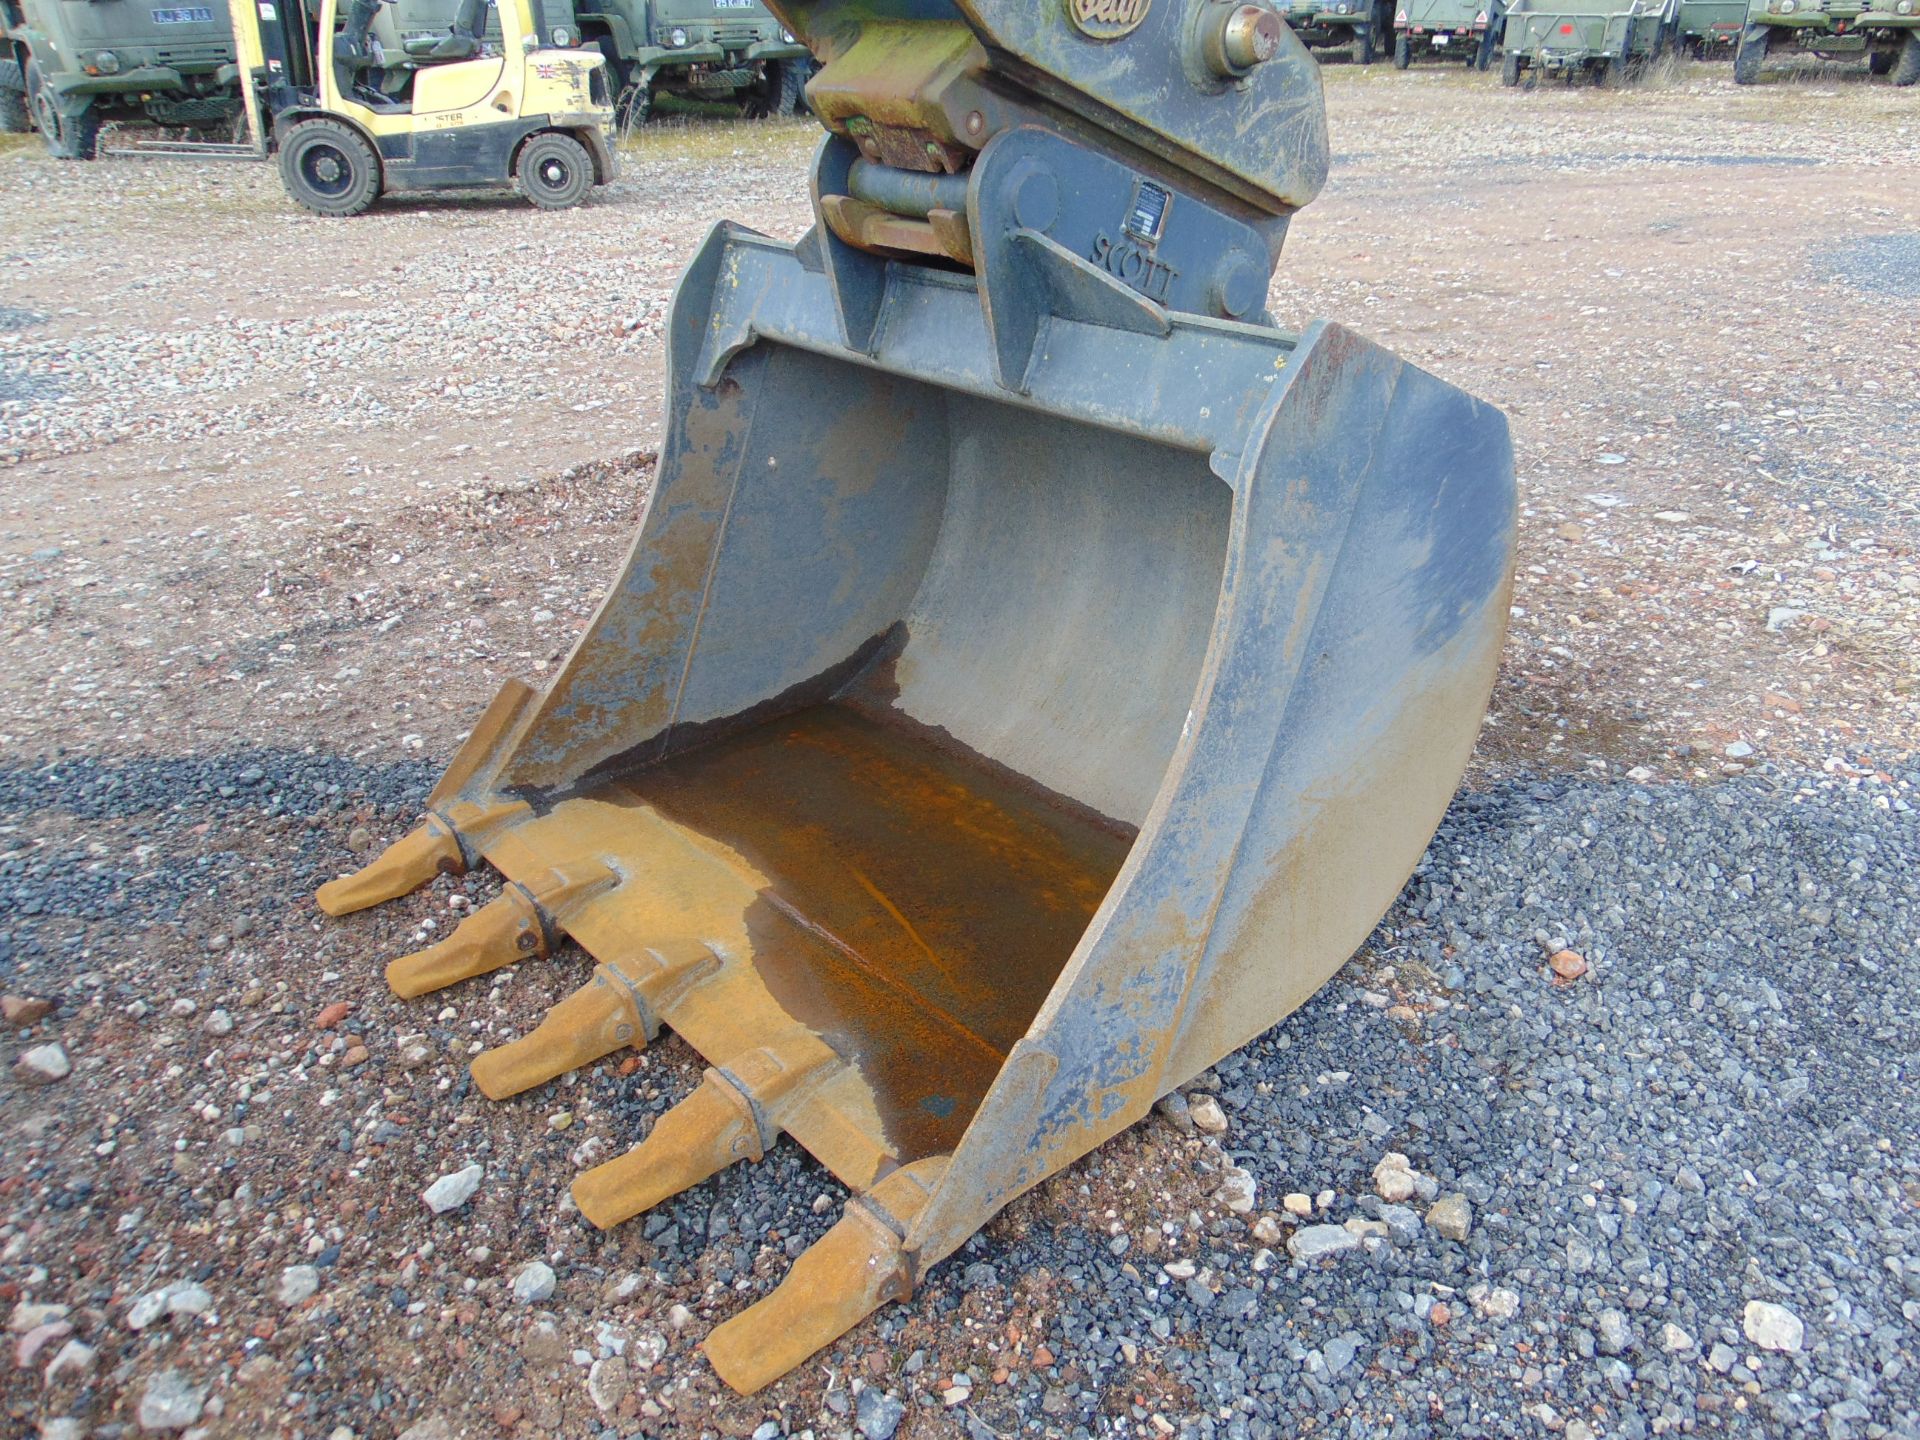 2012 Hyundai Robex 210 LC-9 Crawler Excavator ONLY 1,148 Hours Warranted. - Image 11 of 25